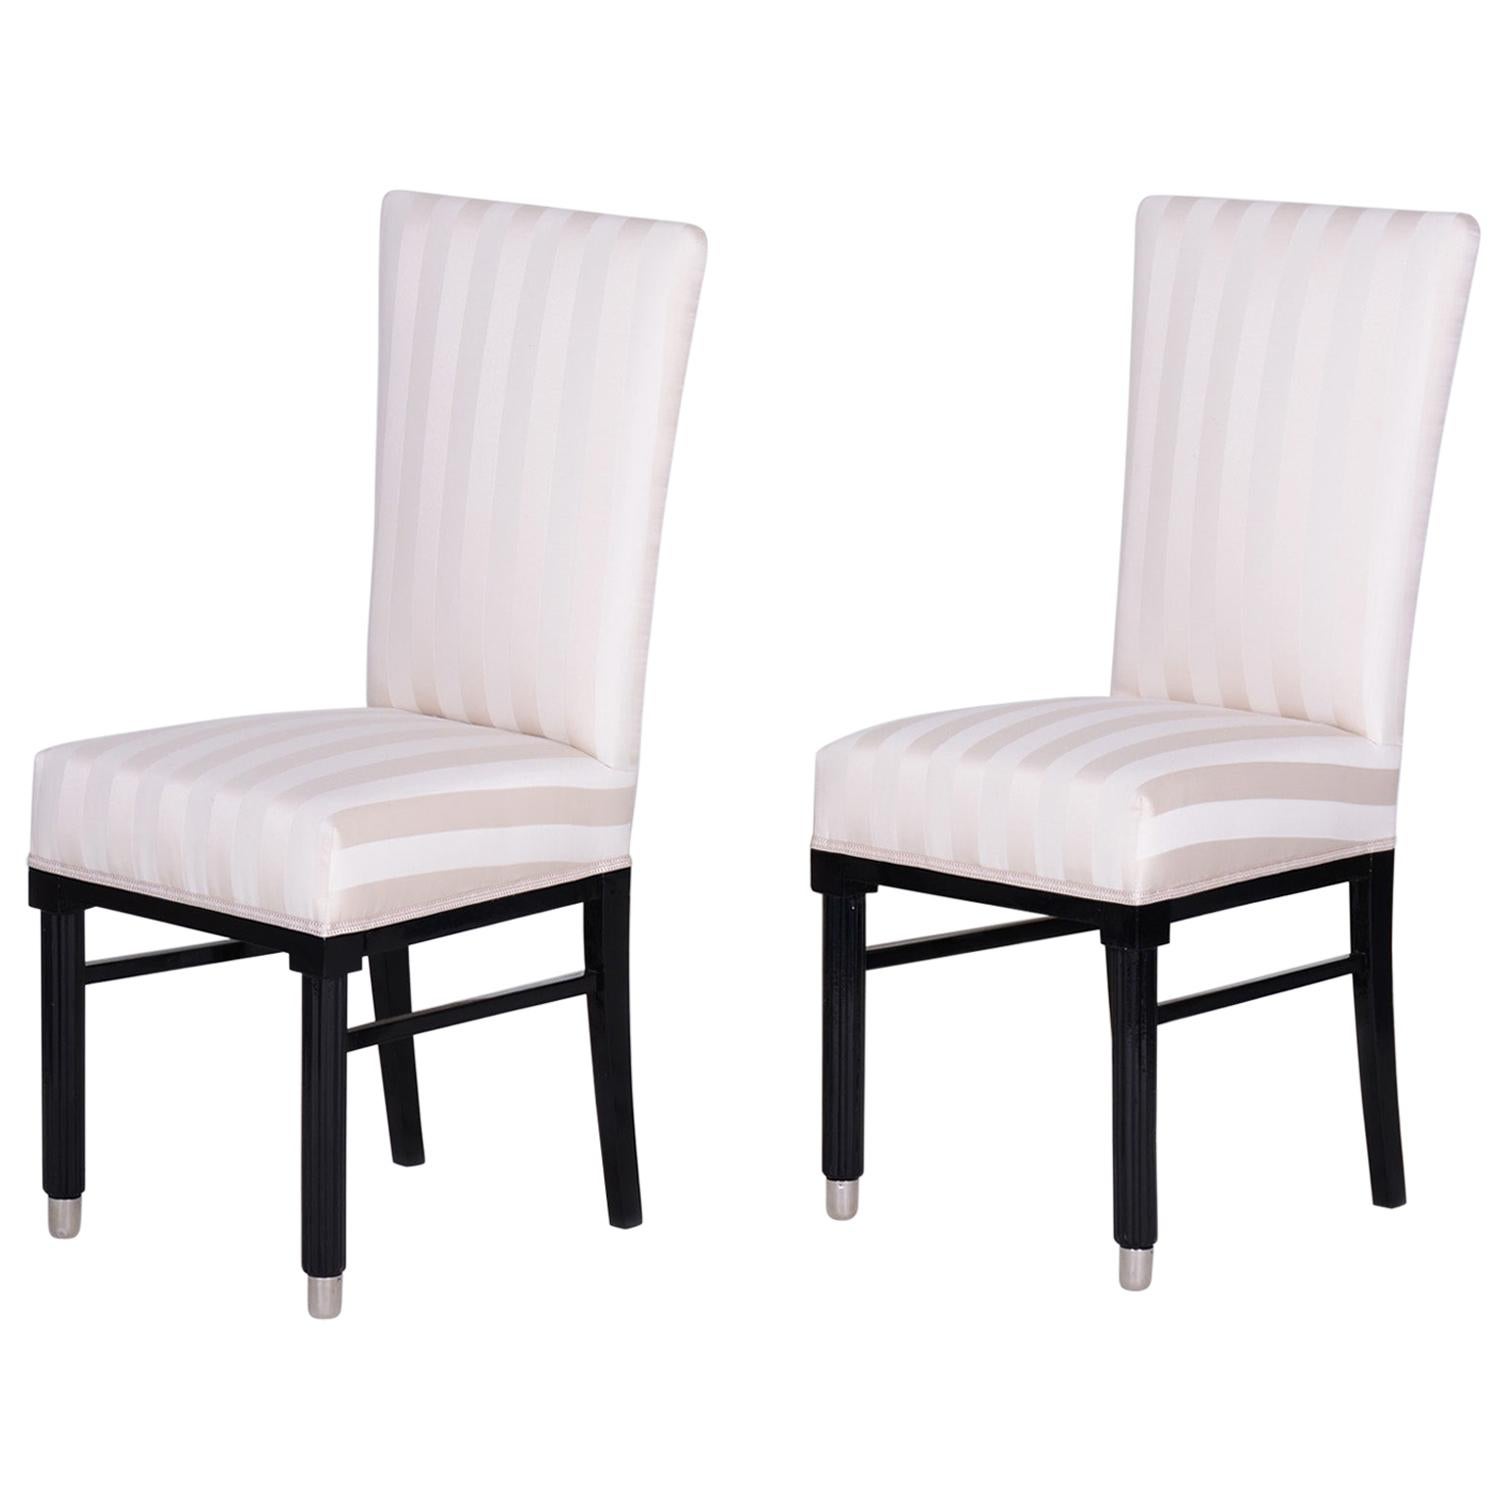 20th Century Pair of French Art Deco Chairs, Black Lacquer, New Upholstery 1920s For Sale